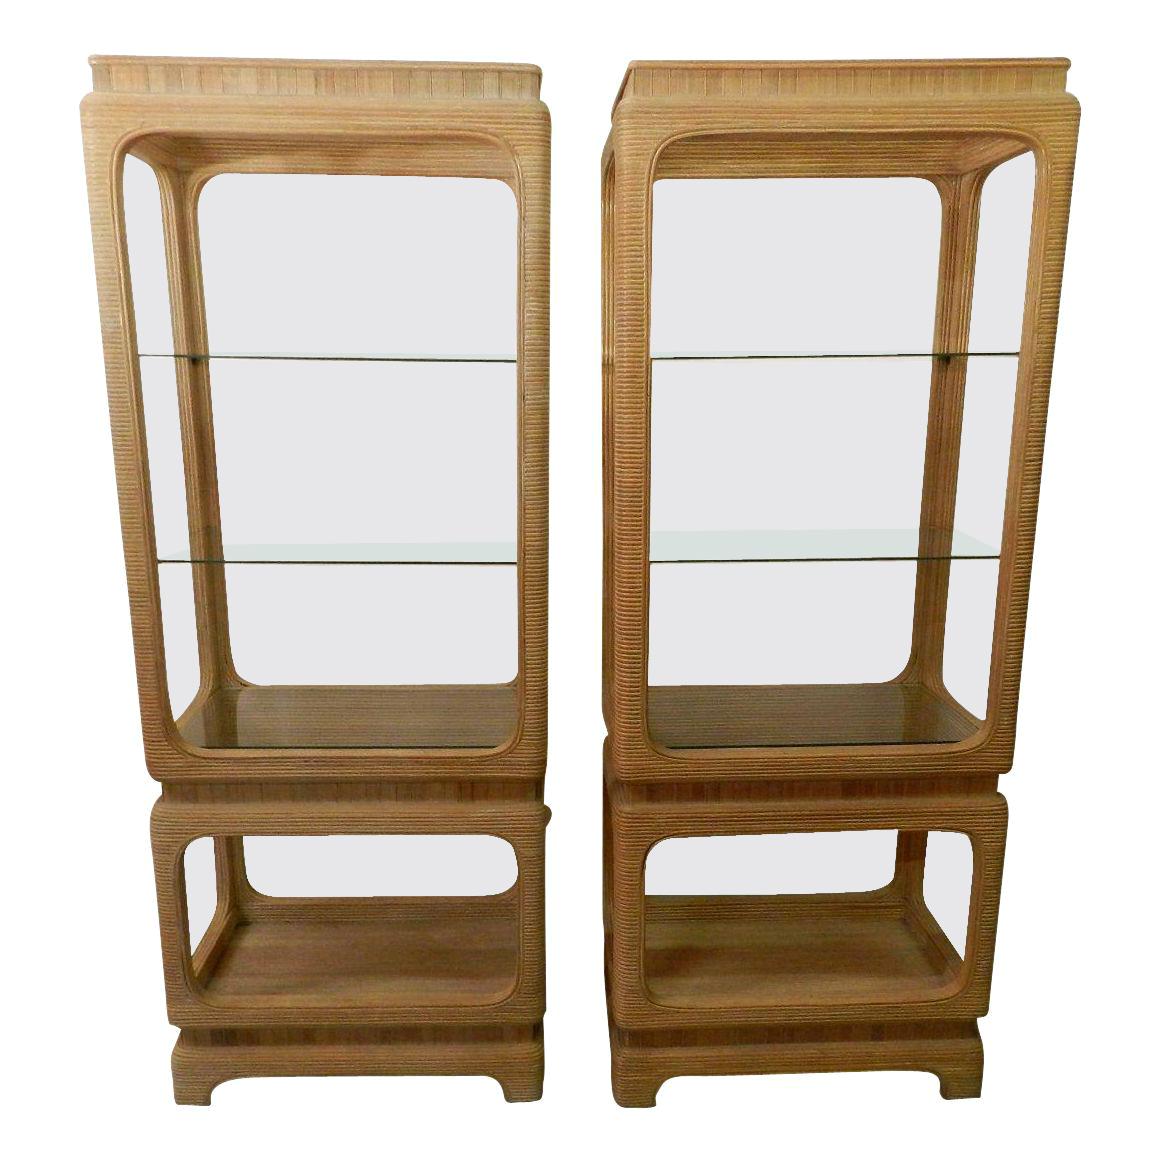 1970s Pair of Pencil Reed Bamboo Etagere Shelves